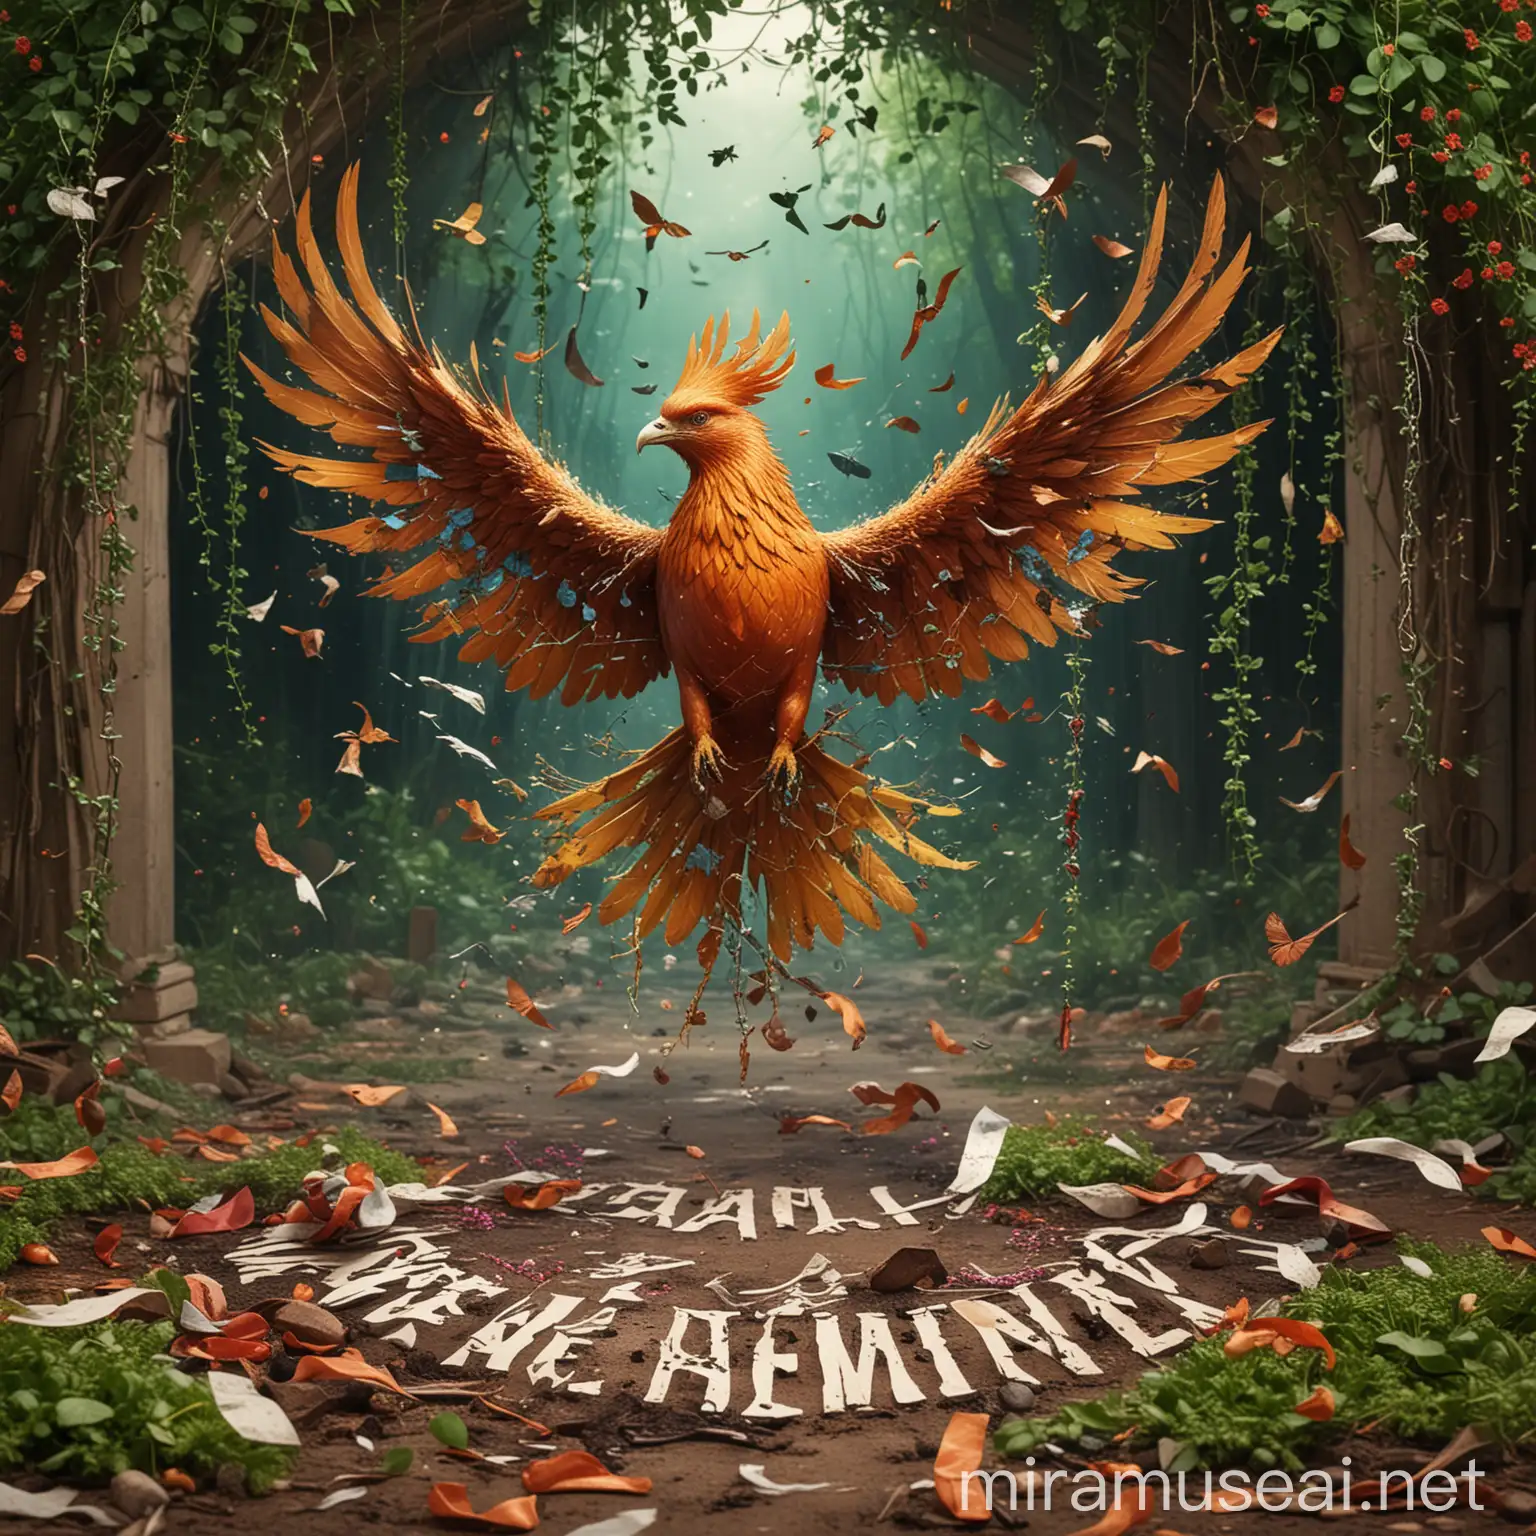 Phoenix Rising from Ashes Symbolic Rebirth with Helping Hands and Inspirational Message